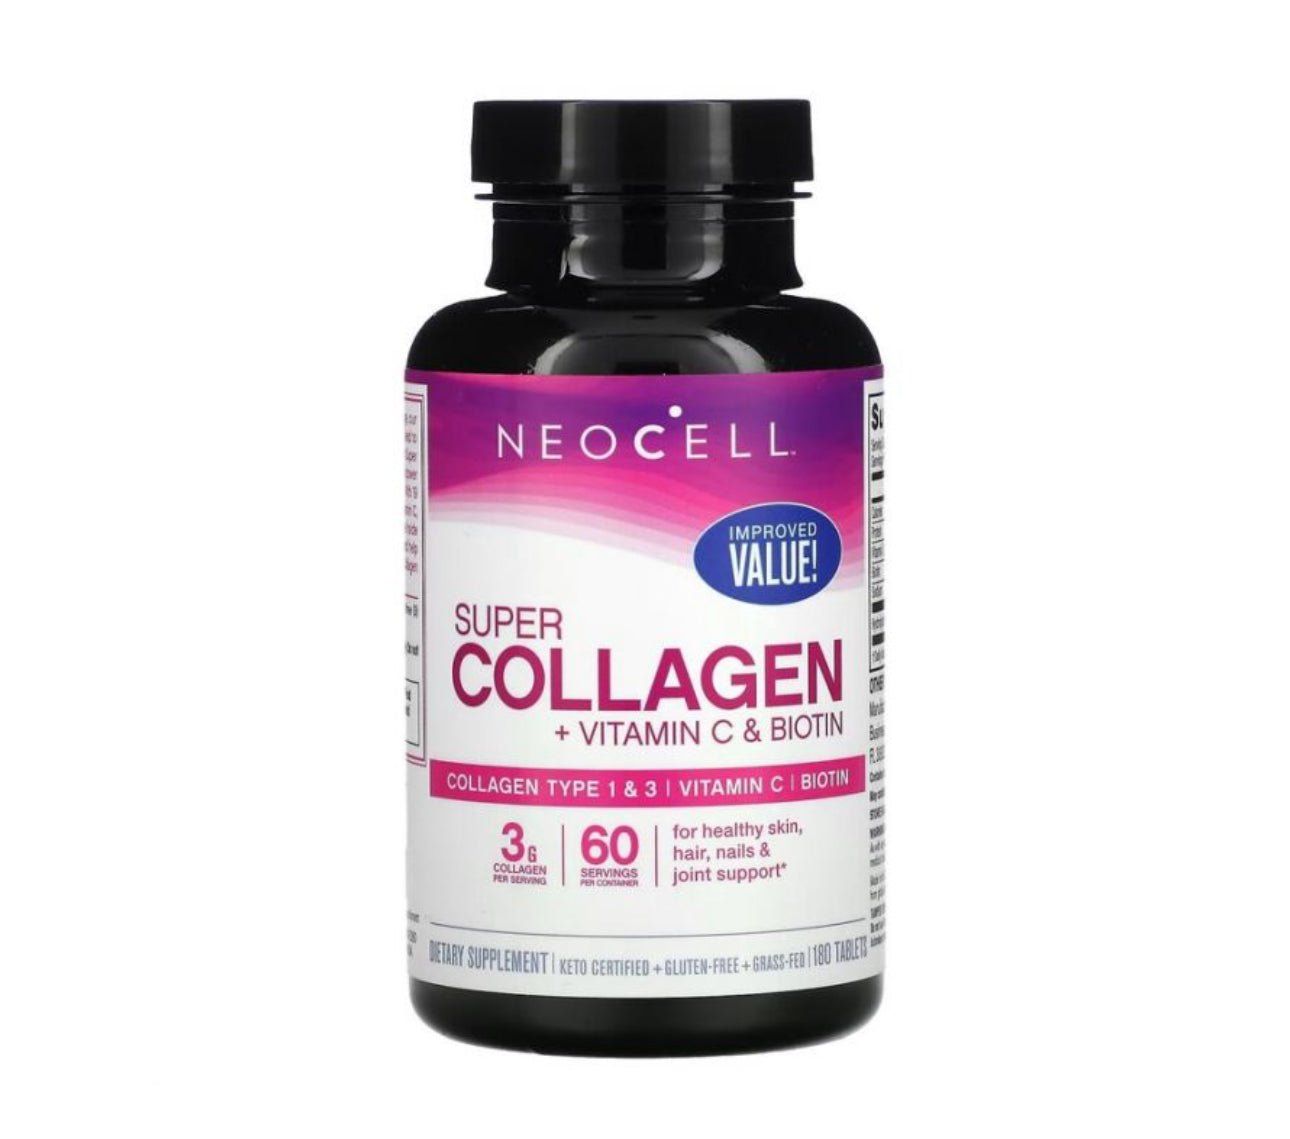 NeoCell Super Collagen + Vitamin C + Biotin 180 Tablets (Old Packaging) - Ome's Beauty Mart